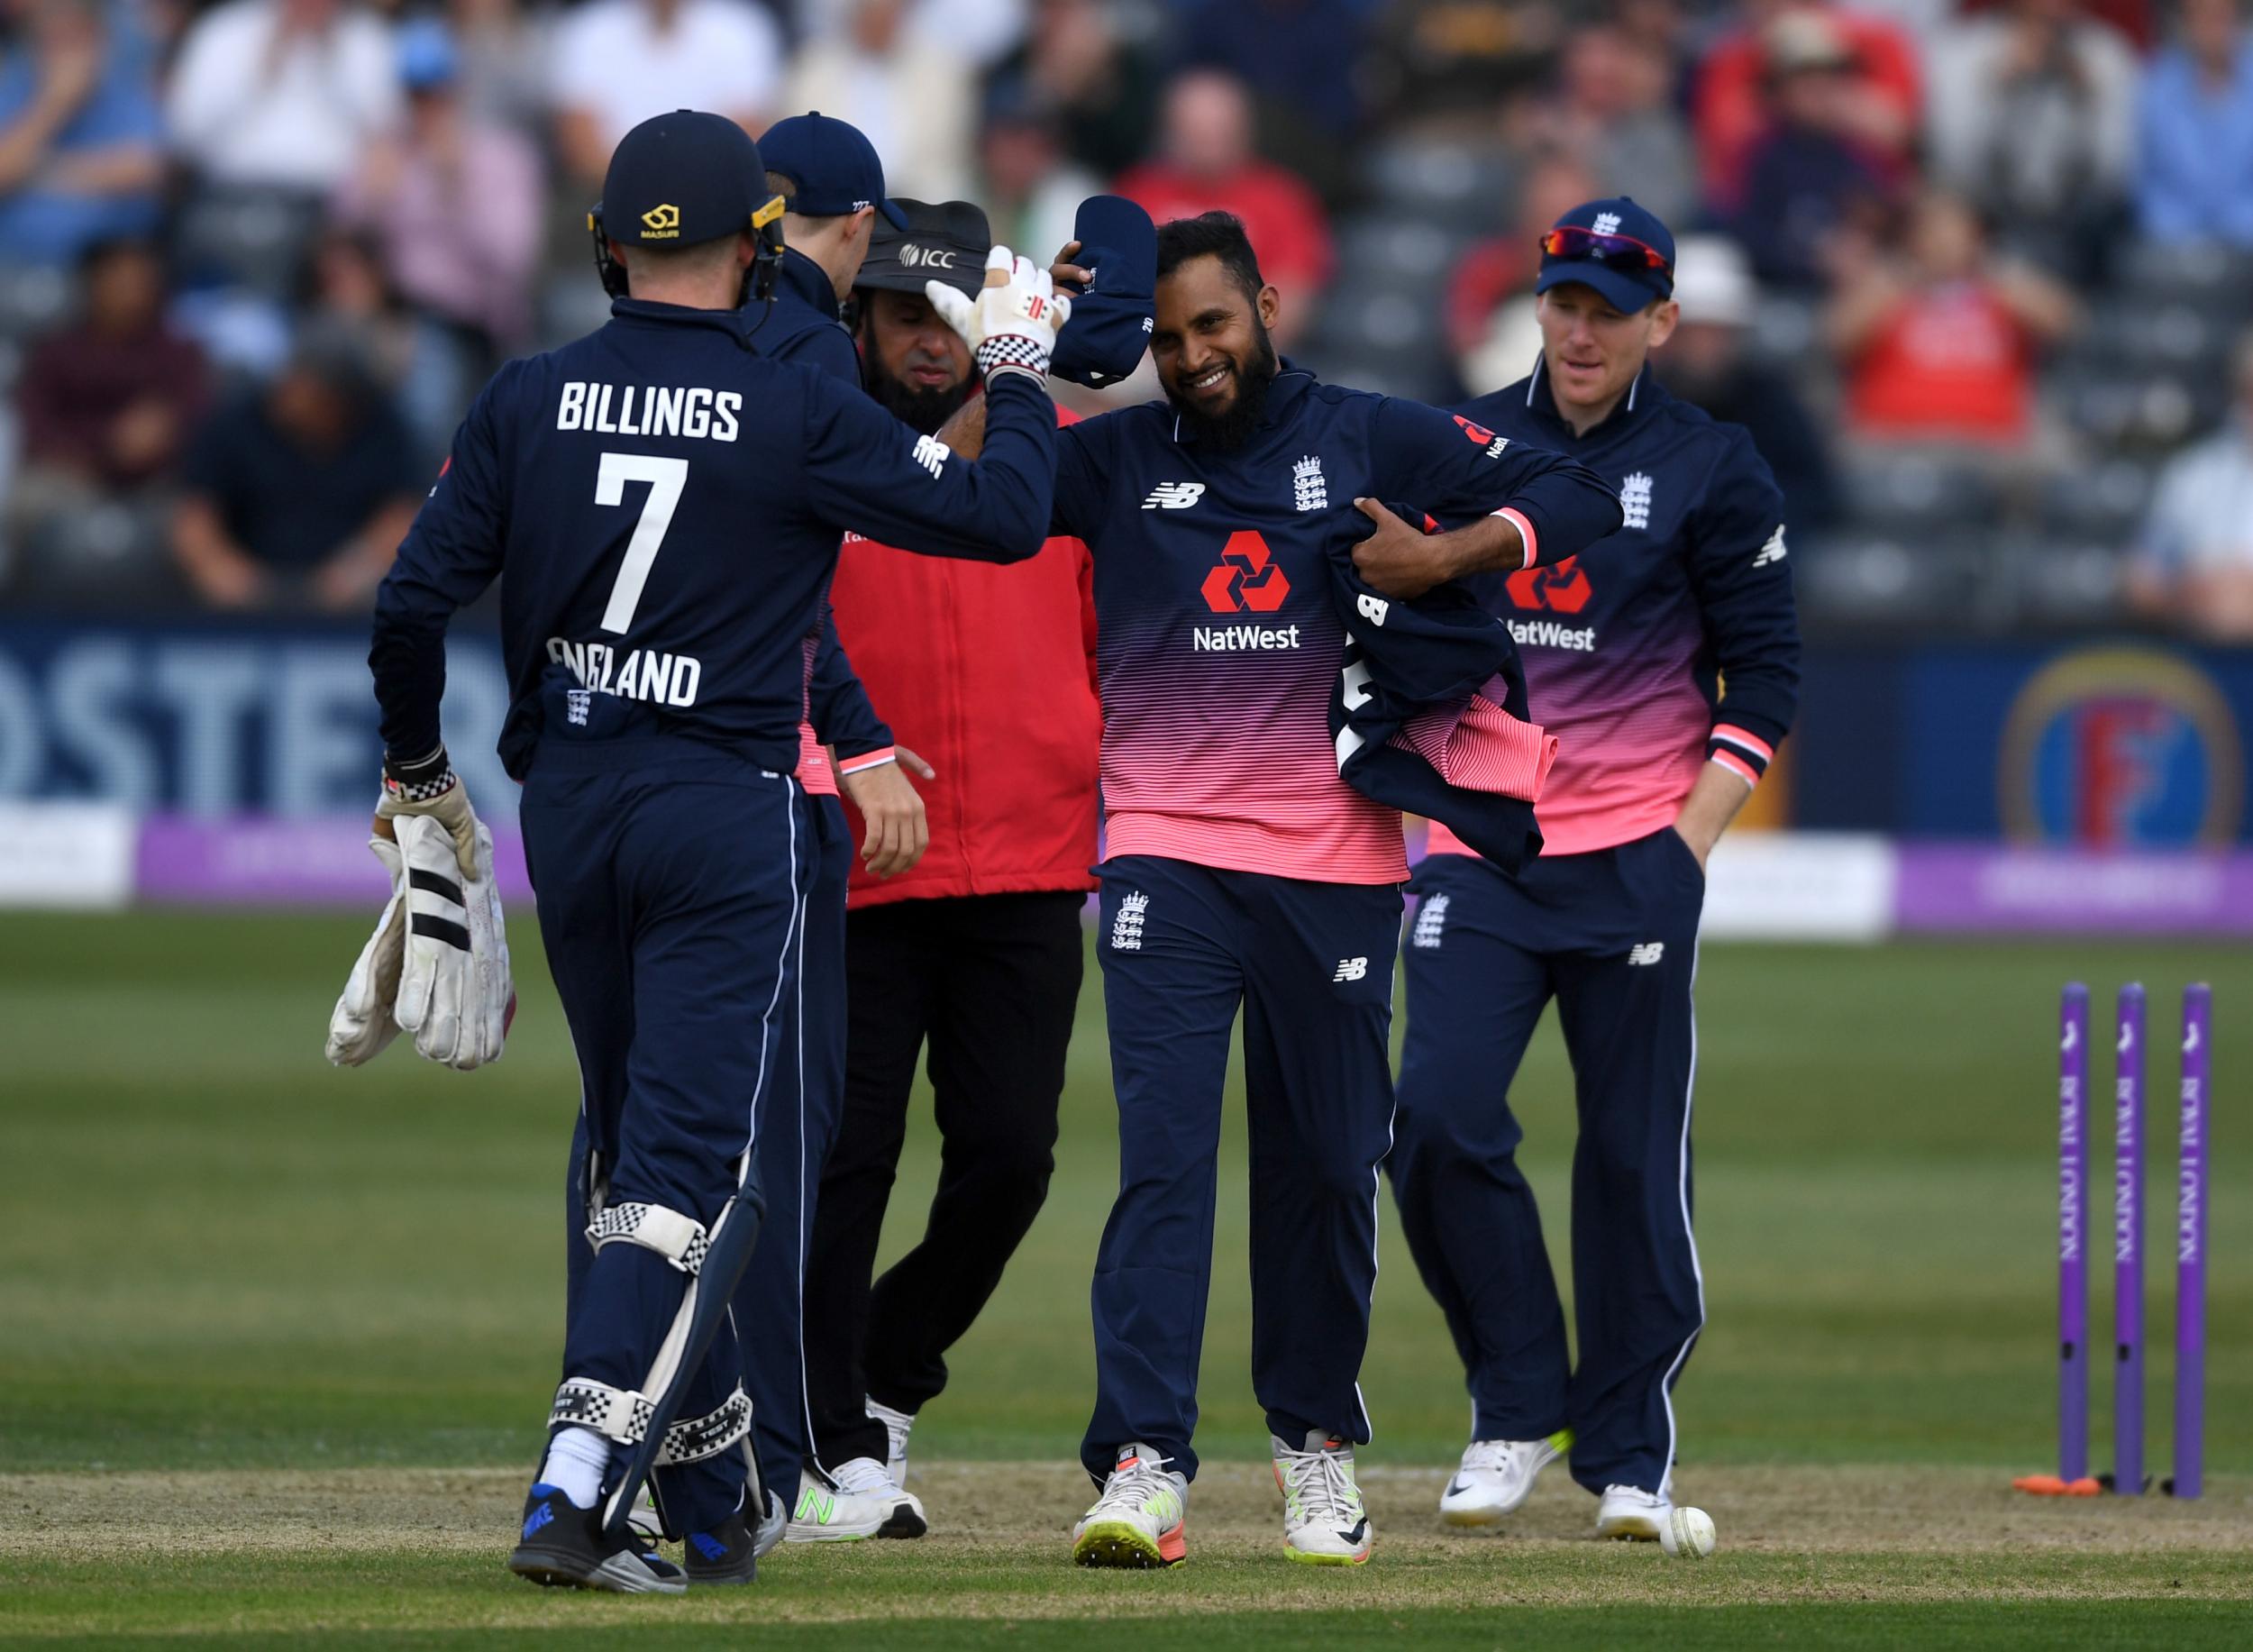 Adil Rashid was superb in the crushing England victory